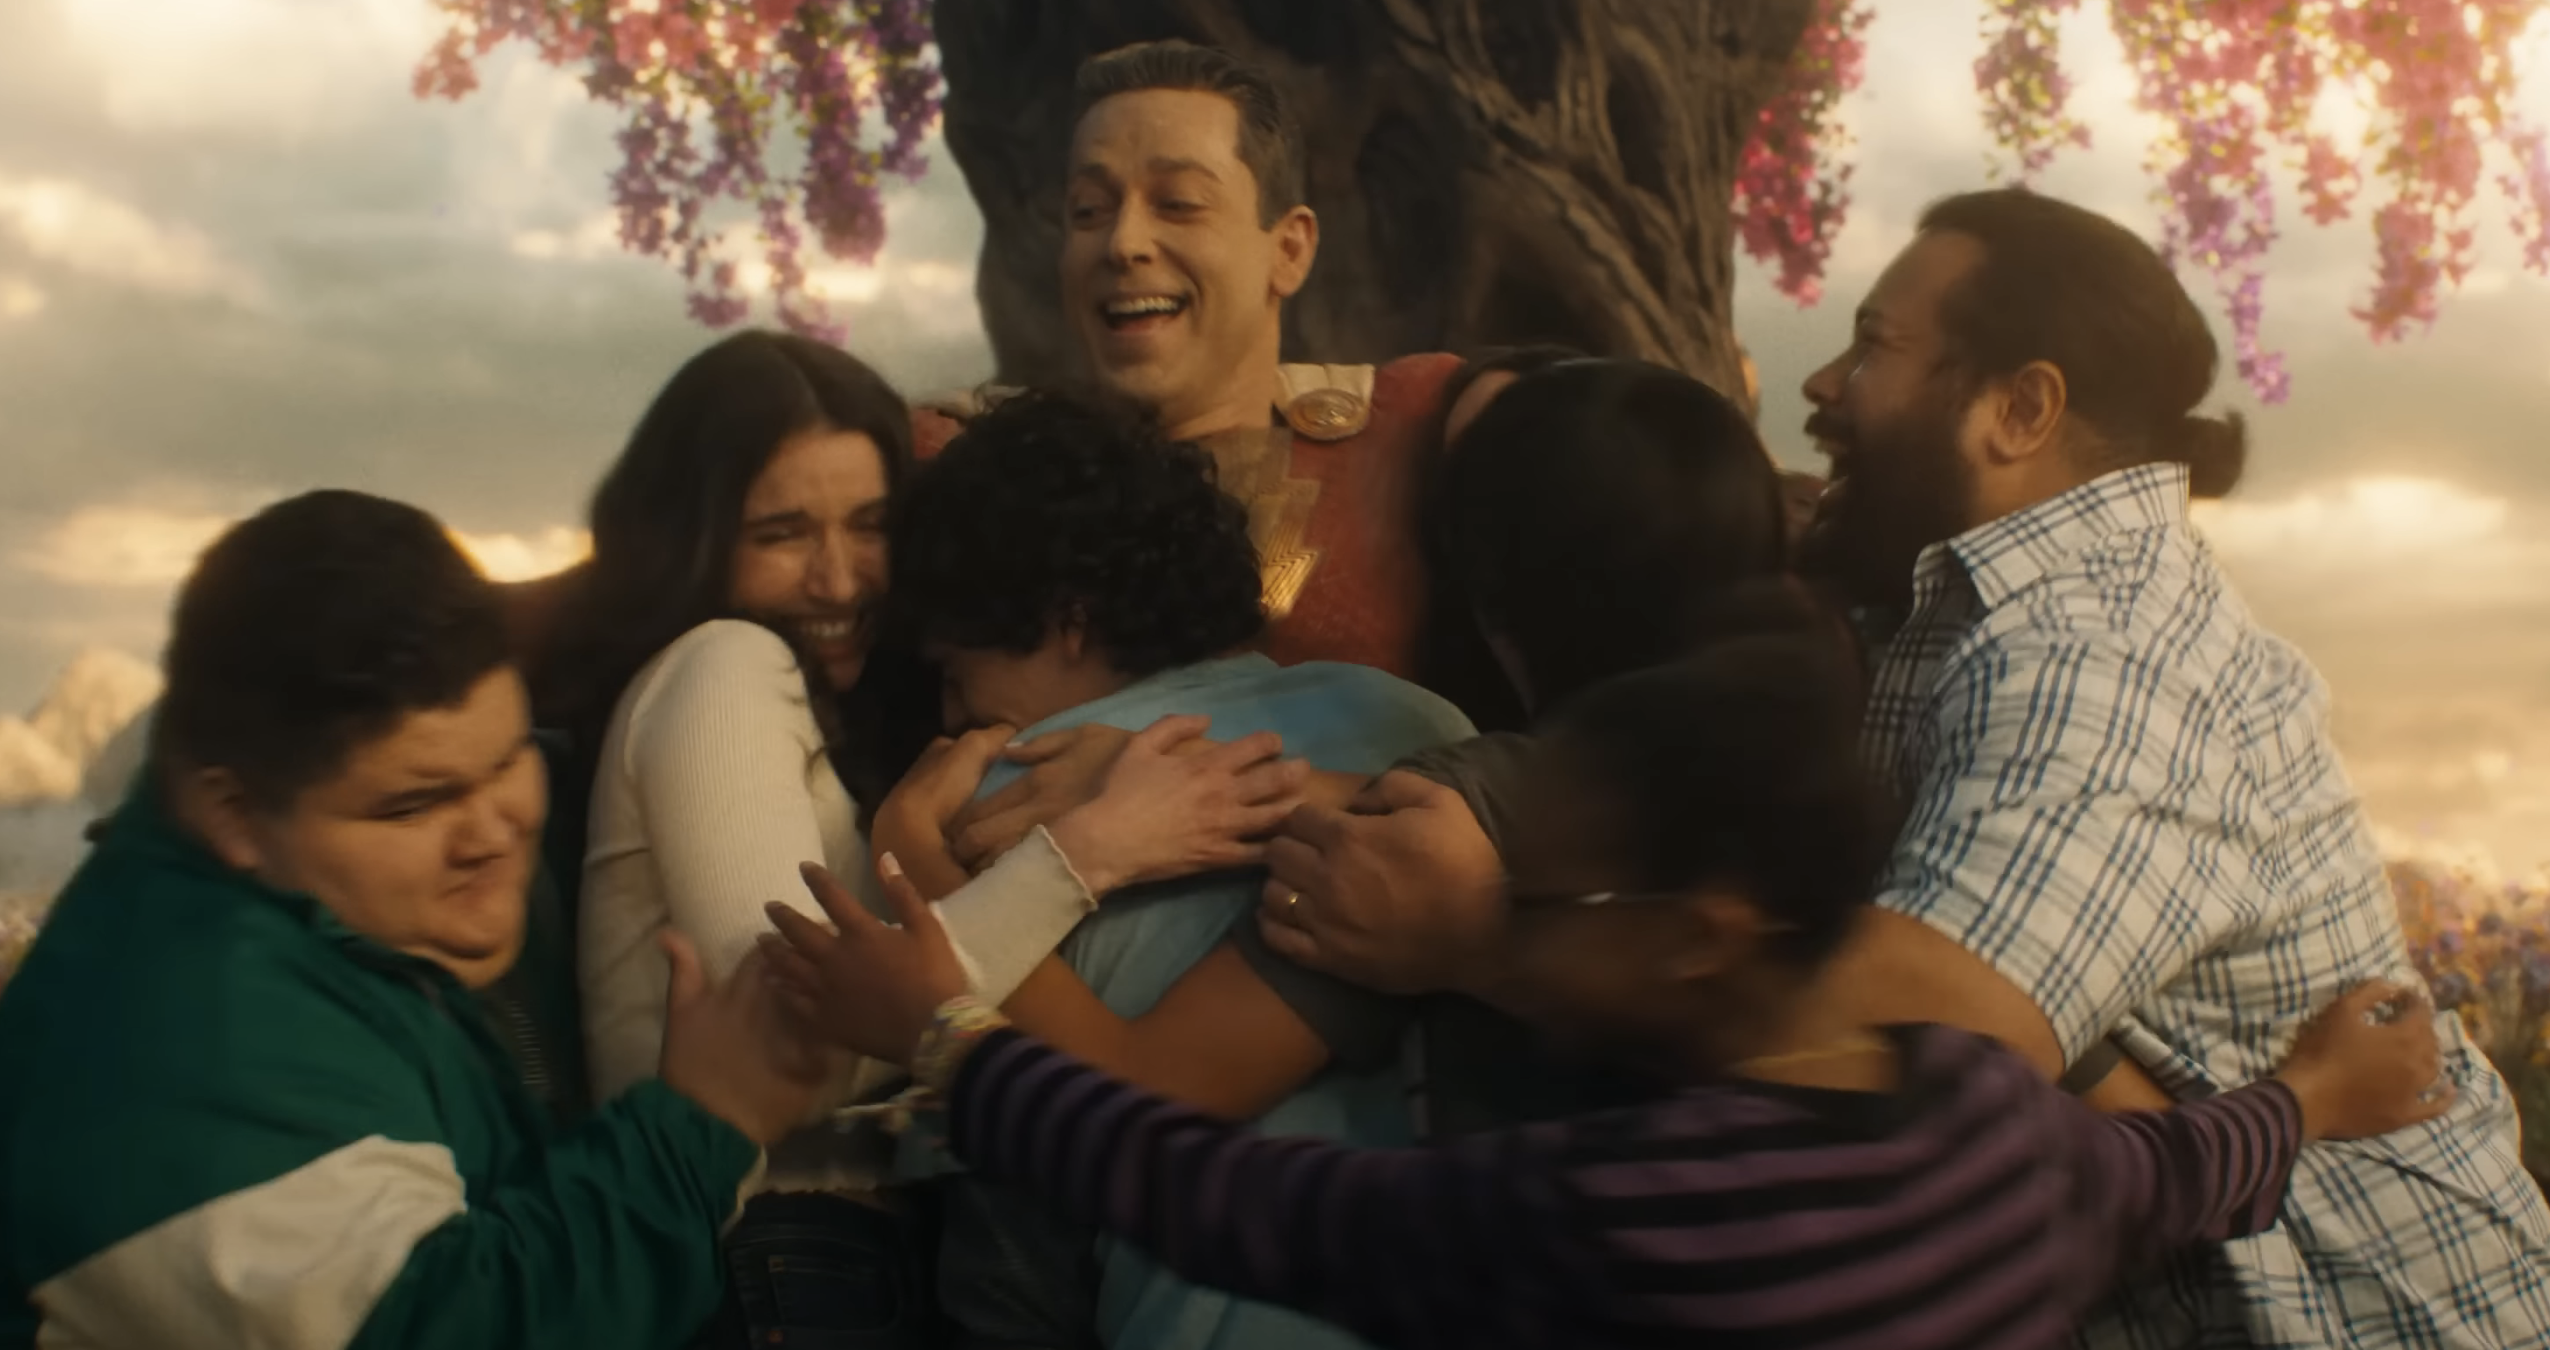 Zachary hugging several people at once in a scene from the film